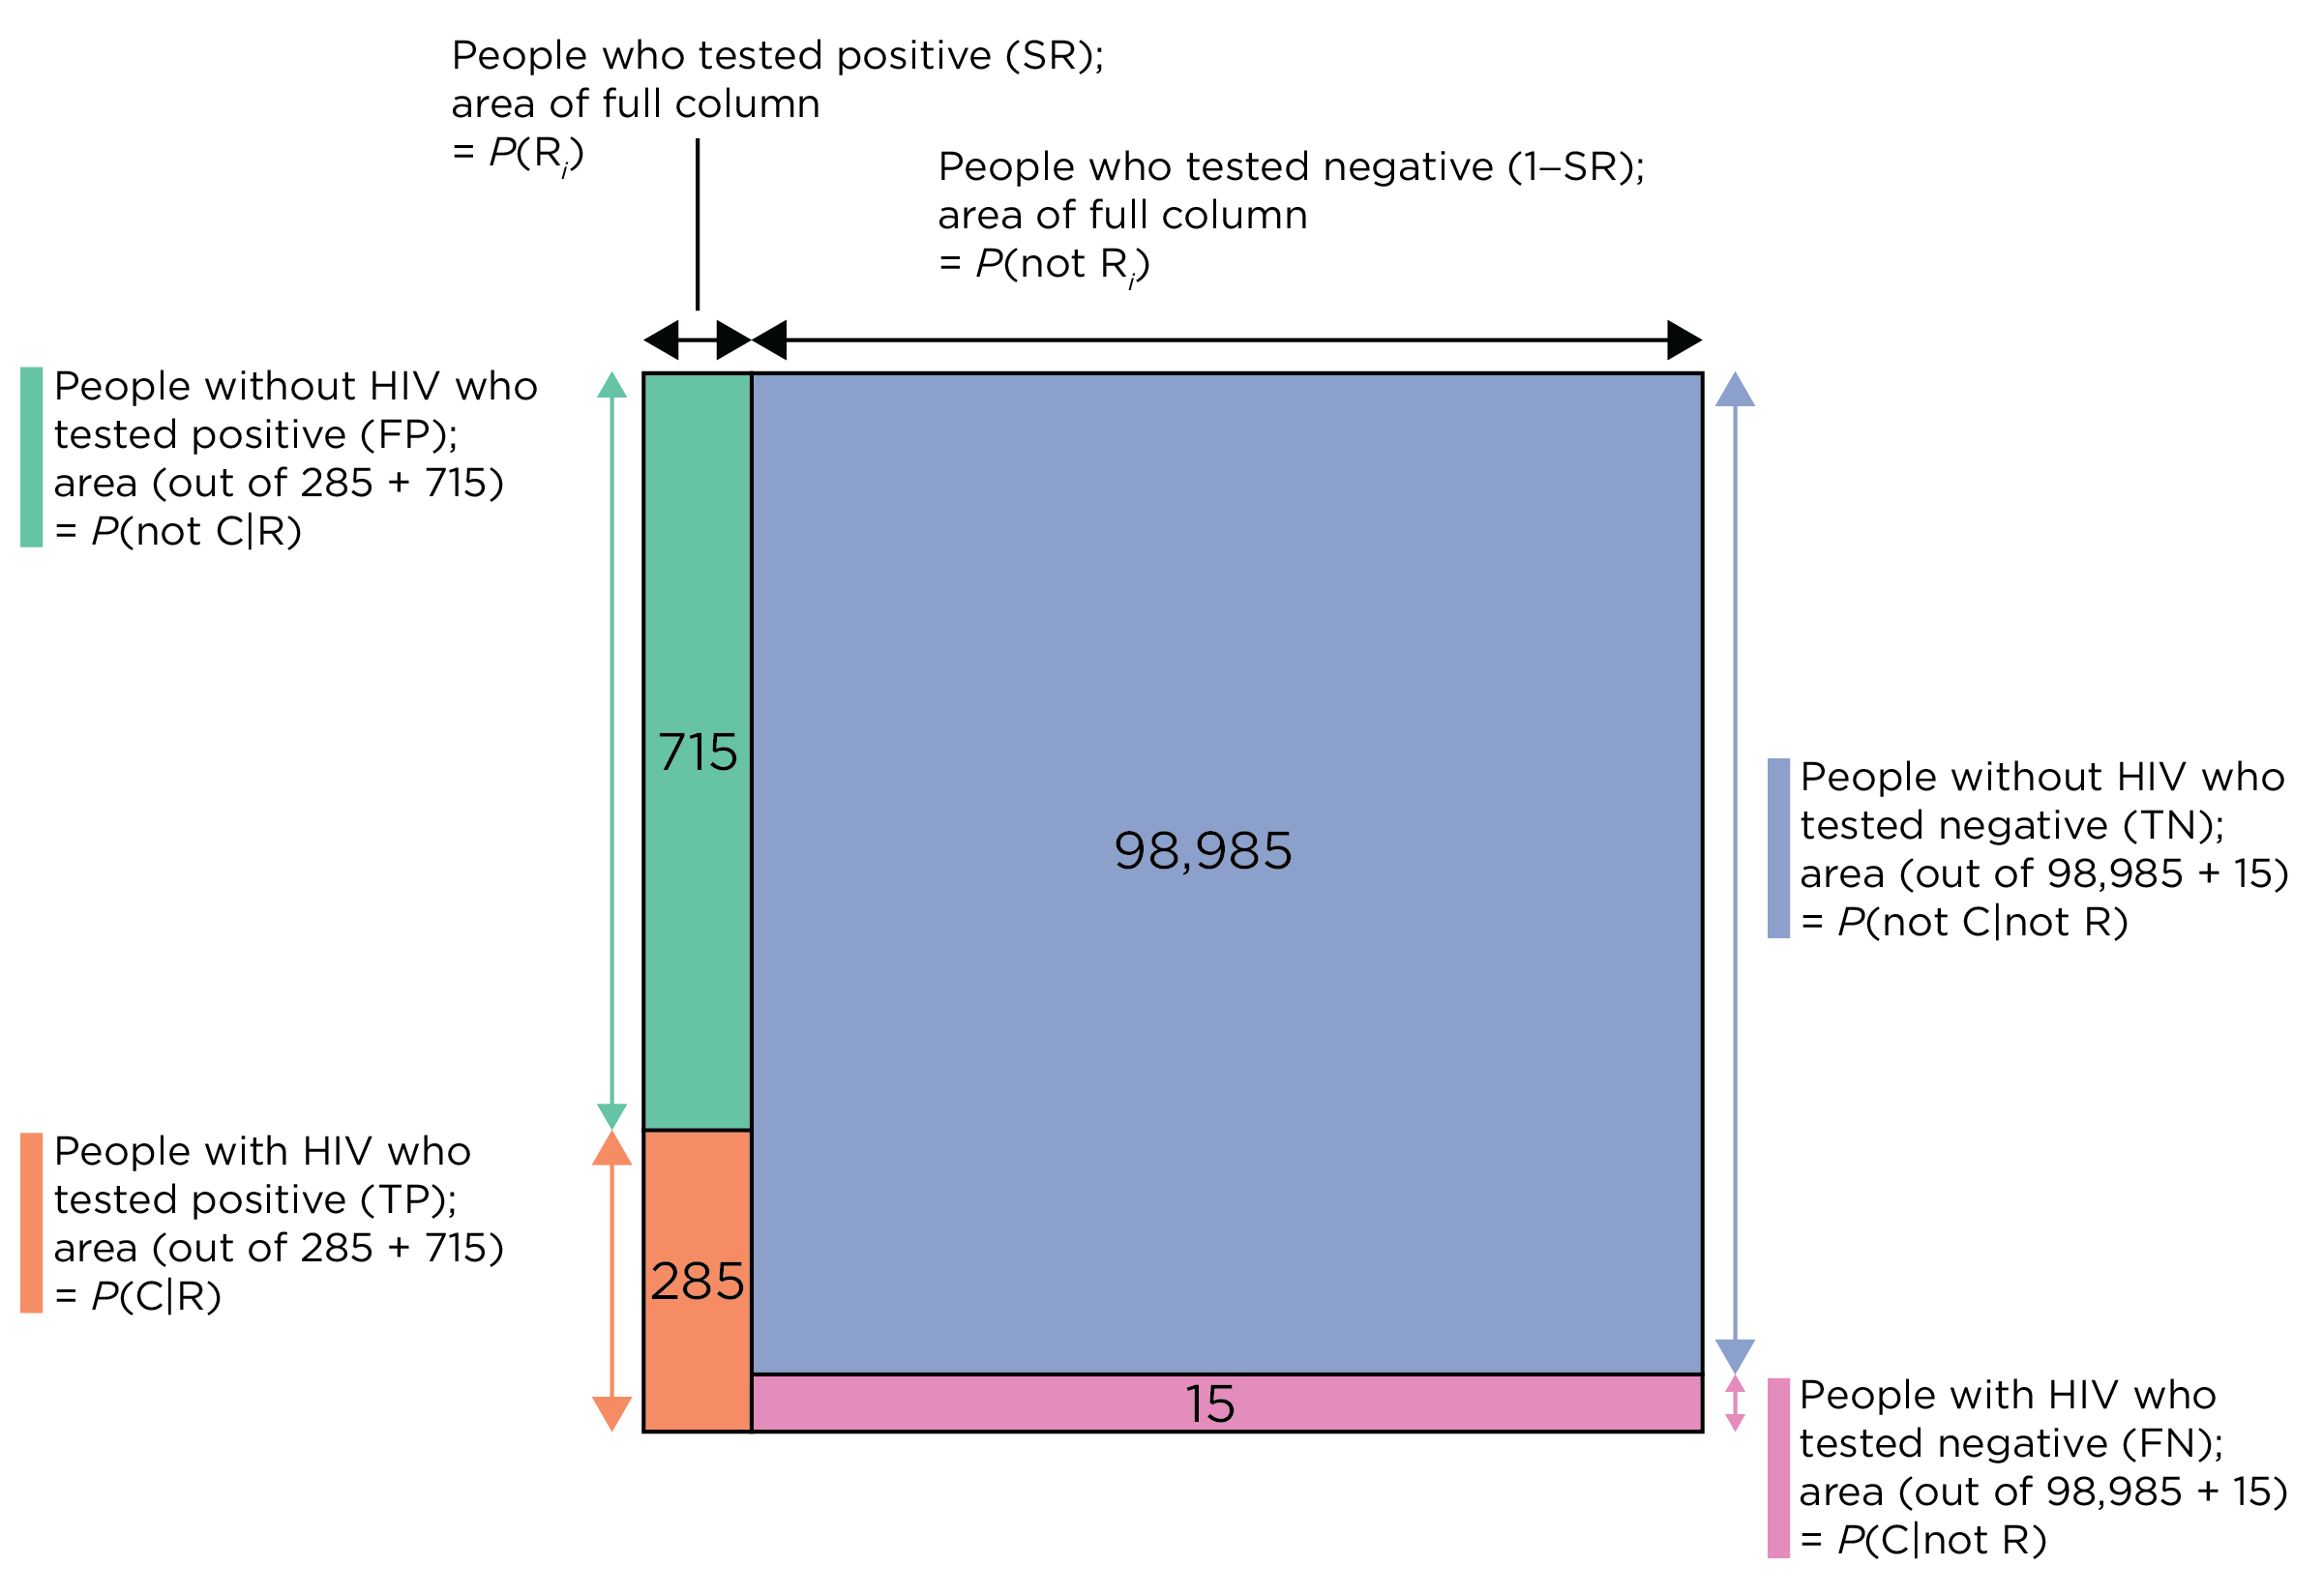 Bayes’ Theorem (and Confusion Matrix) Depicted Visually, where the Marginal Probability is the Selection Ratio (SR). The four boxes represent the number of true positives (TP), true negatives (TN), false positives (FP), and false negatives (FN). Note: Boxes are not drawn to scale; otherwise, some regions would be too small to include text.